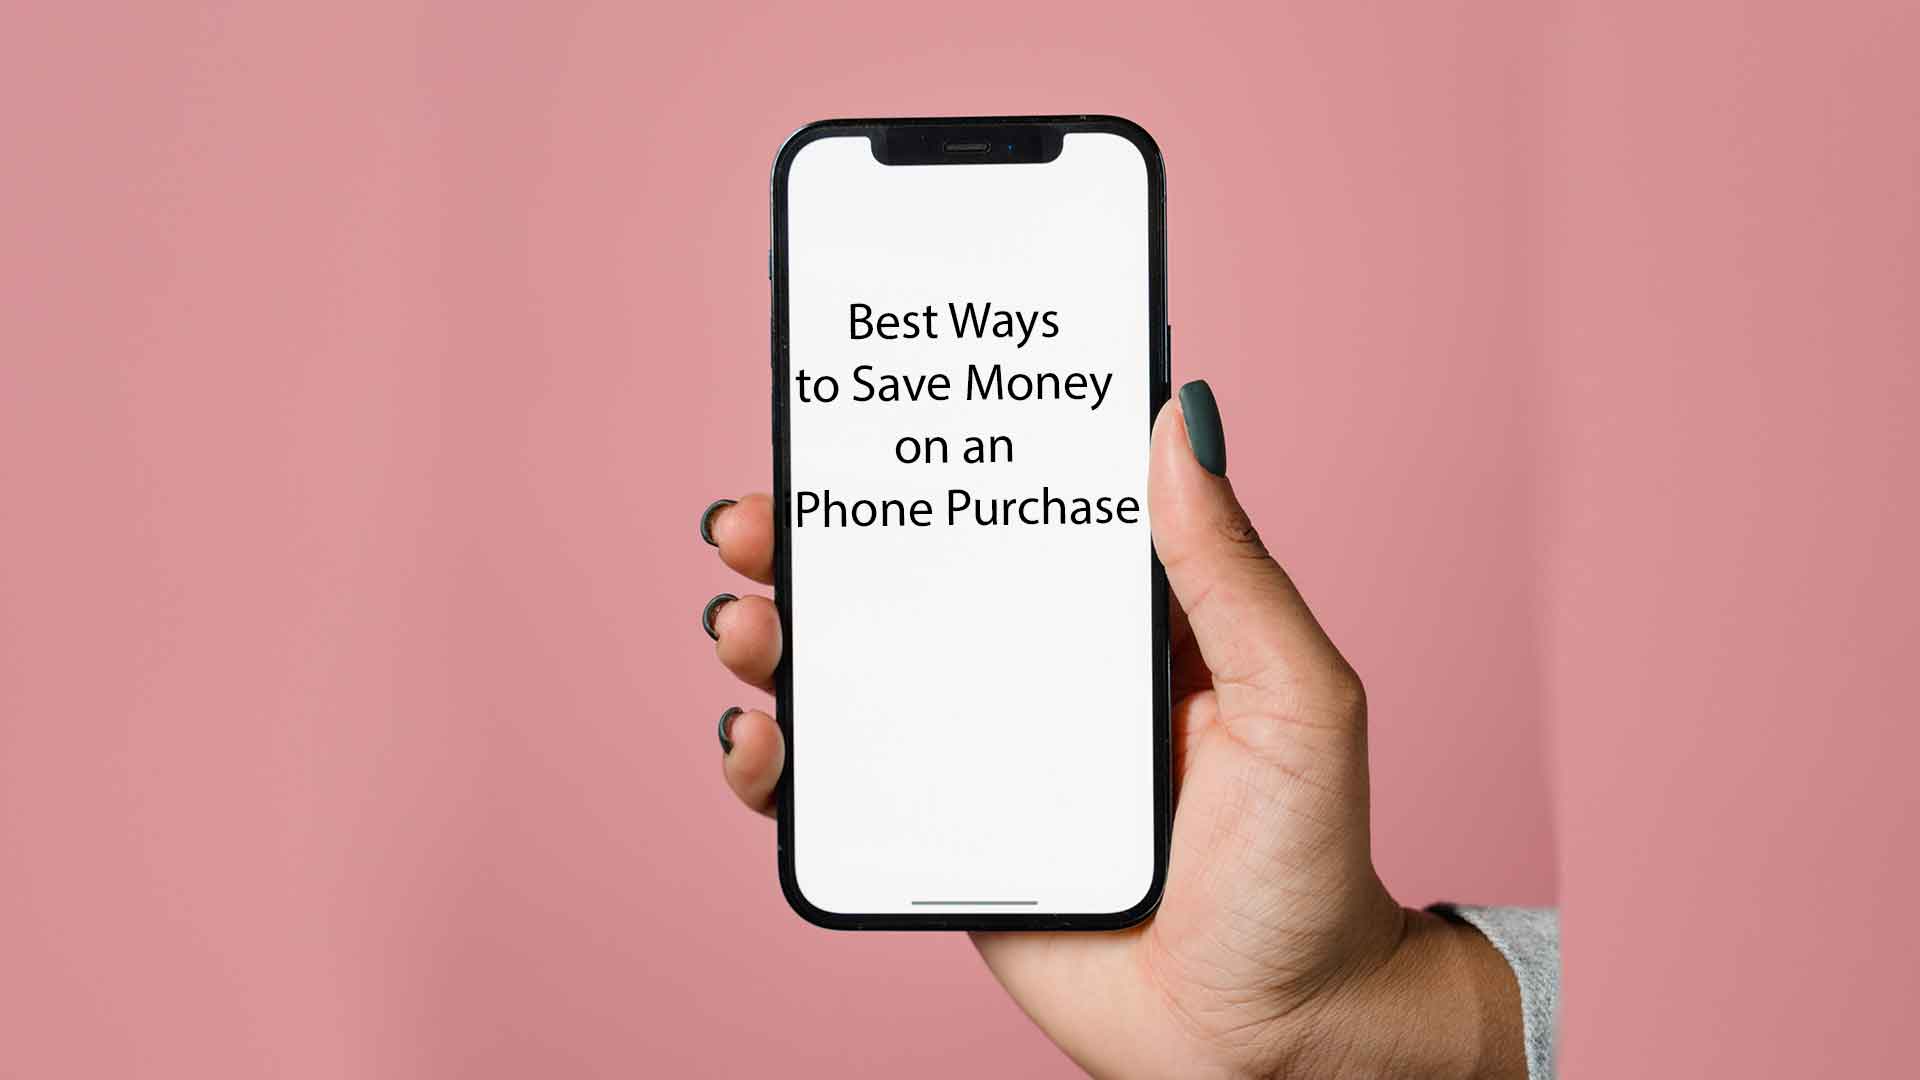 Best Ways to Save Money on an iPhone Purchase